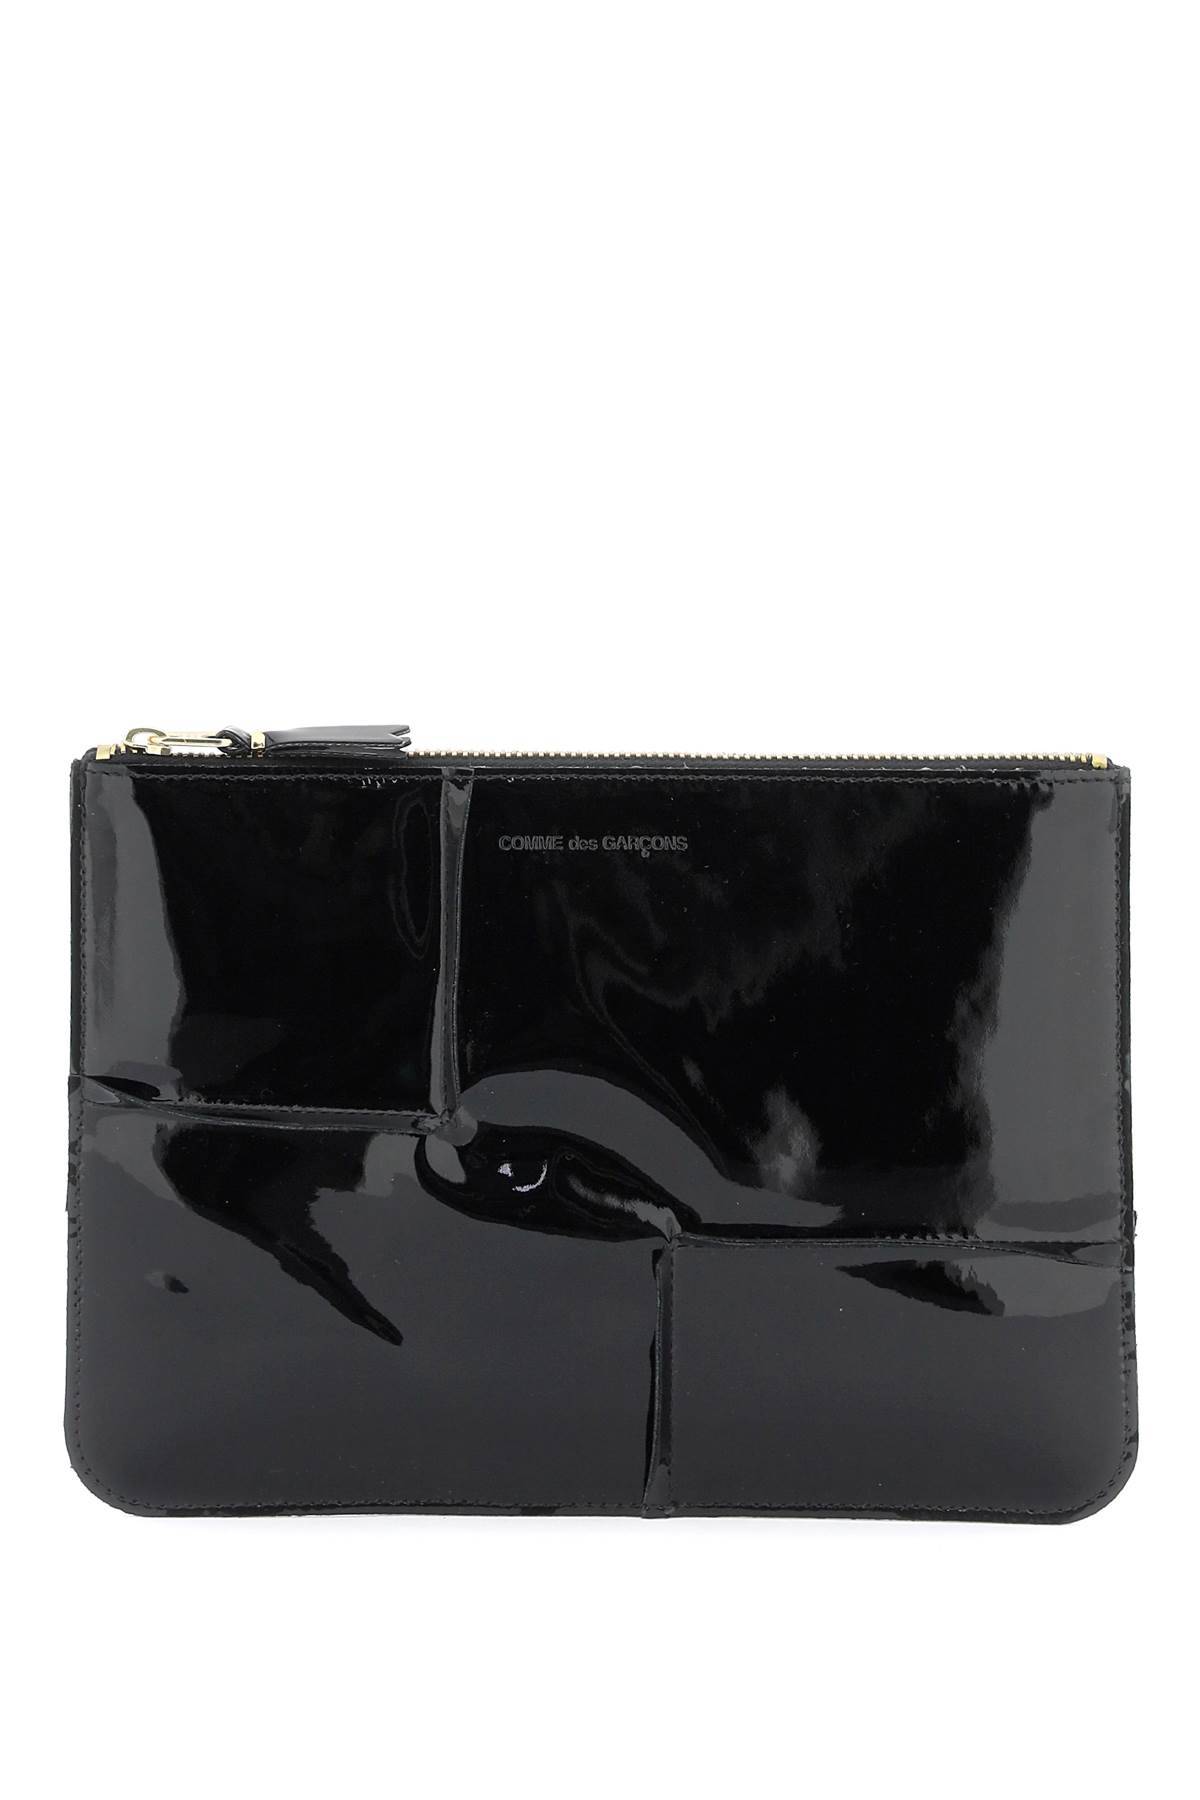 COMME DES GARCONS WALLET COMME DES GARCONS WALLET glossy patent leather